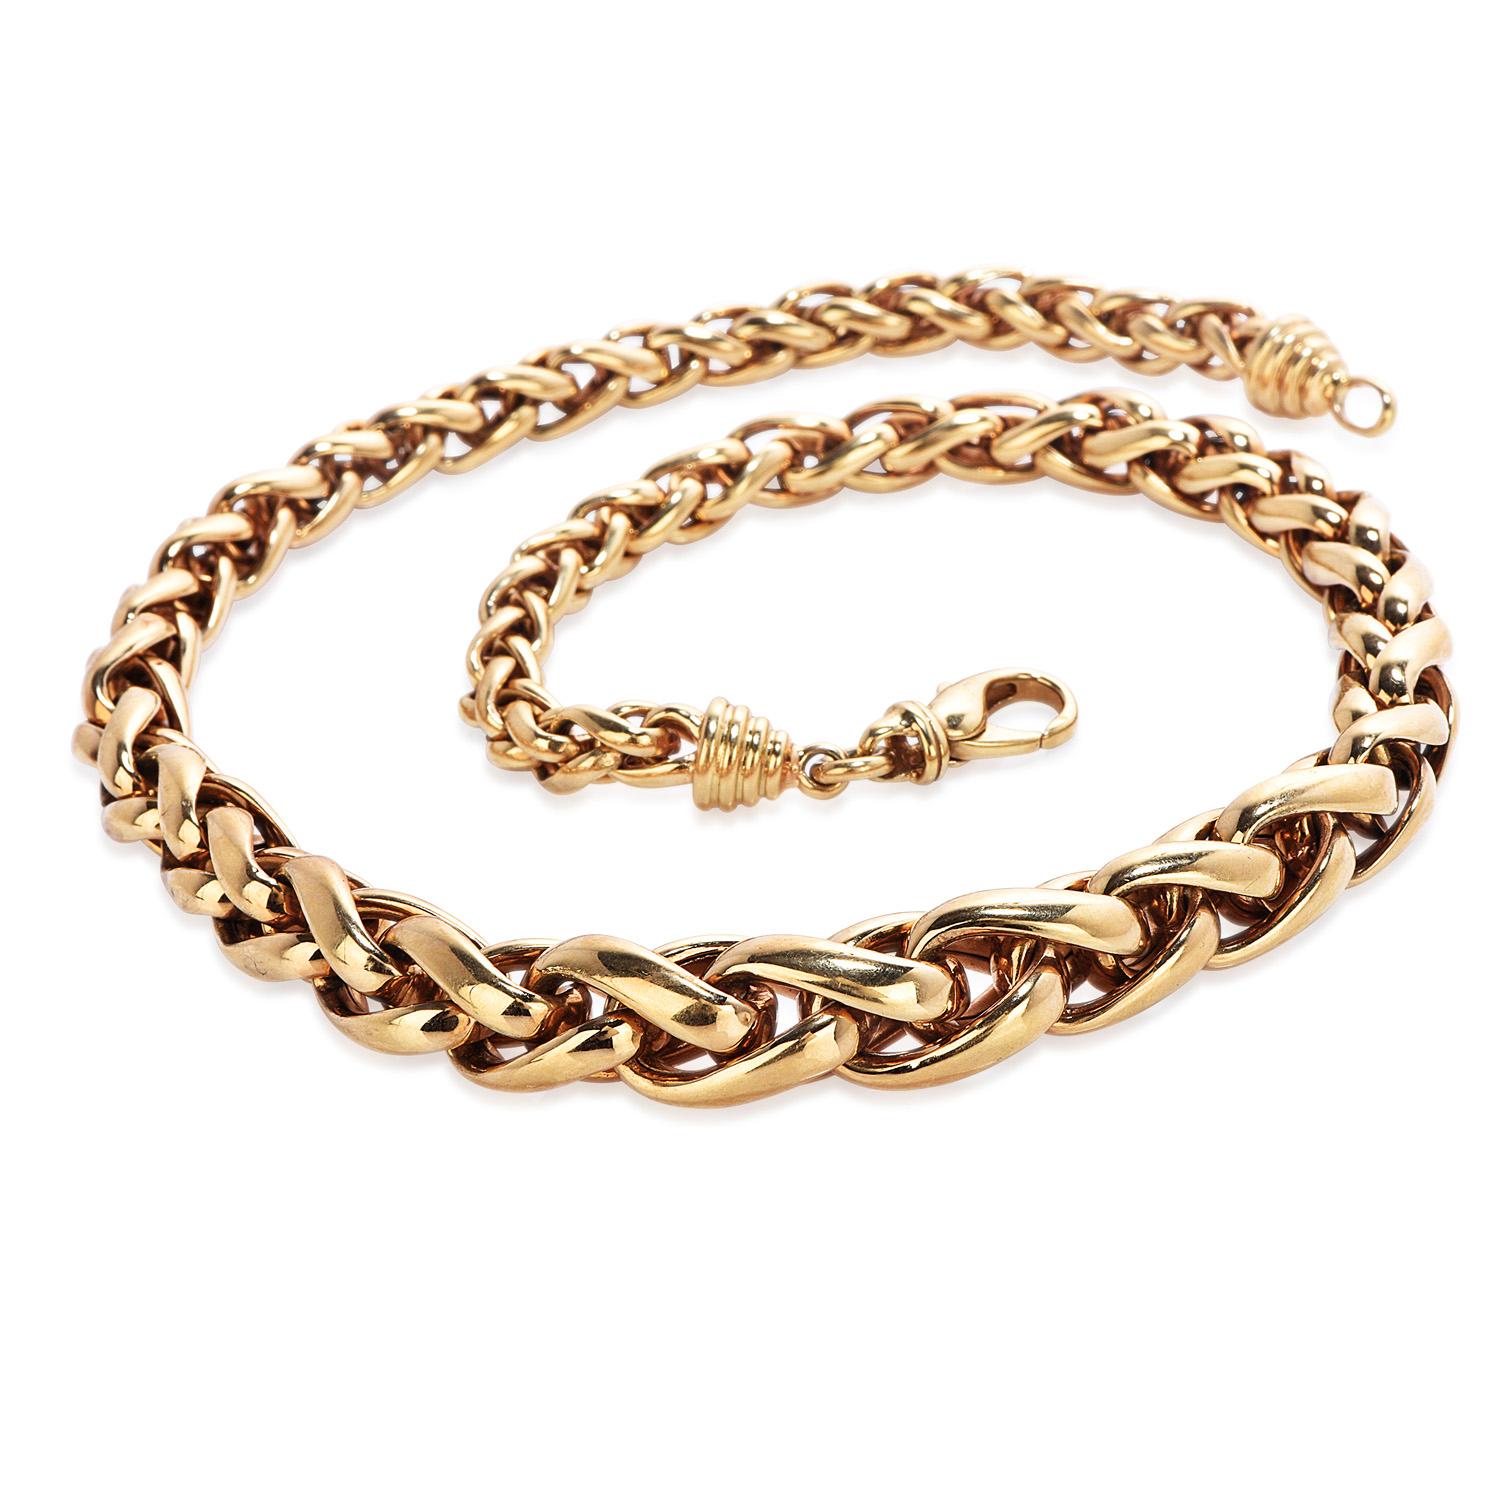 Large 1980's  Graduated Foxtail design links, in and versatile unisex link chain necklace 

Crafted in solid 18K yellow, high quality made links with a polished finish,

Weighs 54.5 grams and the total length is approximately 16.5'